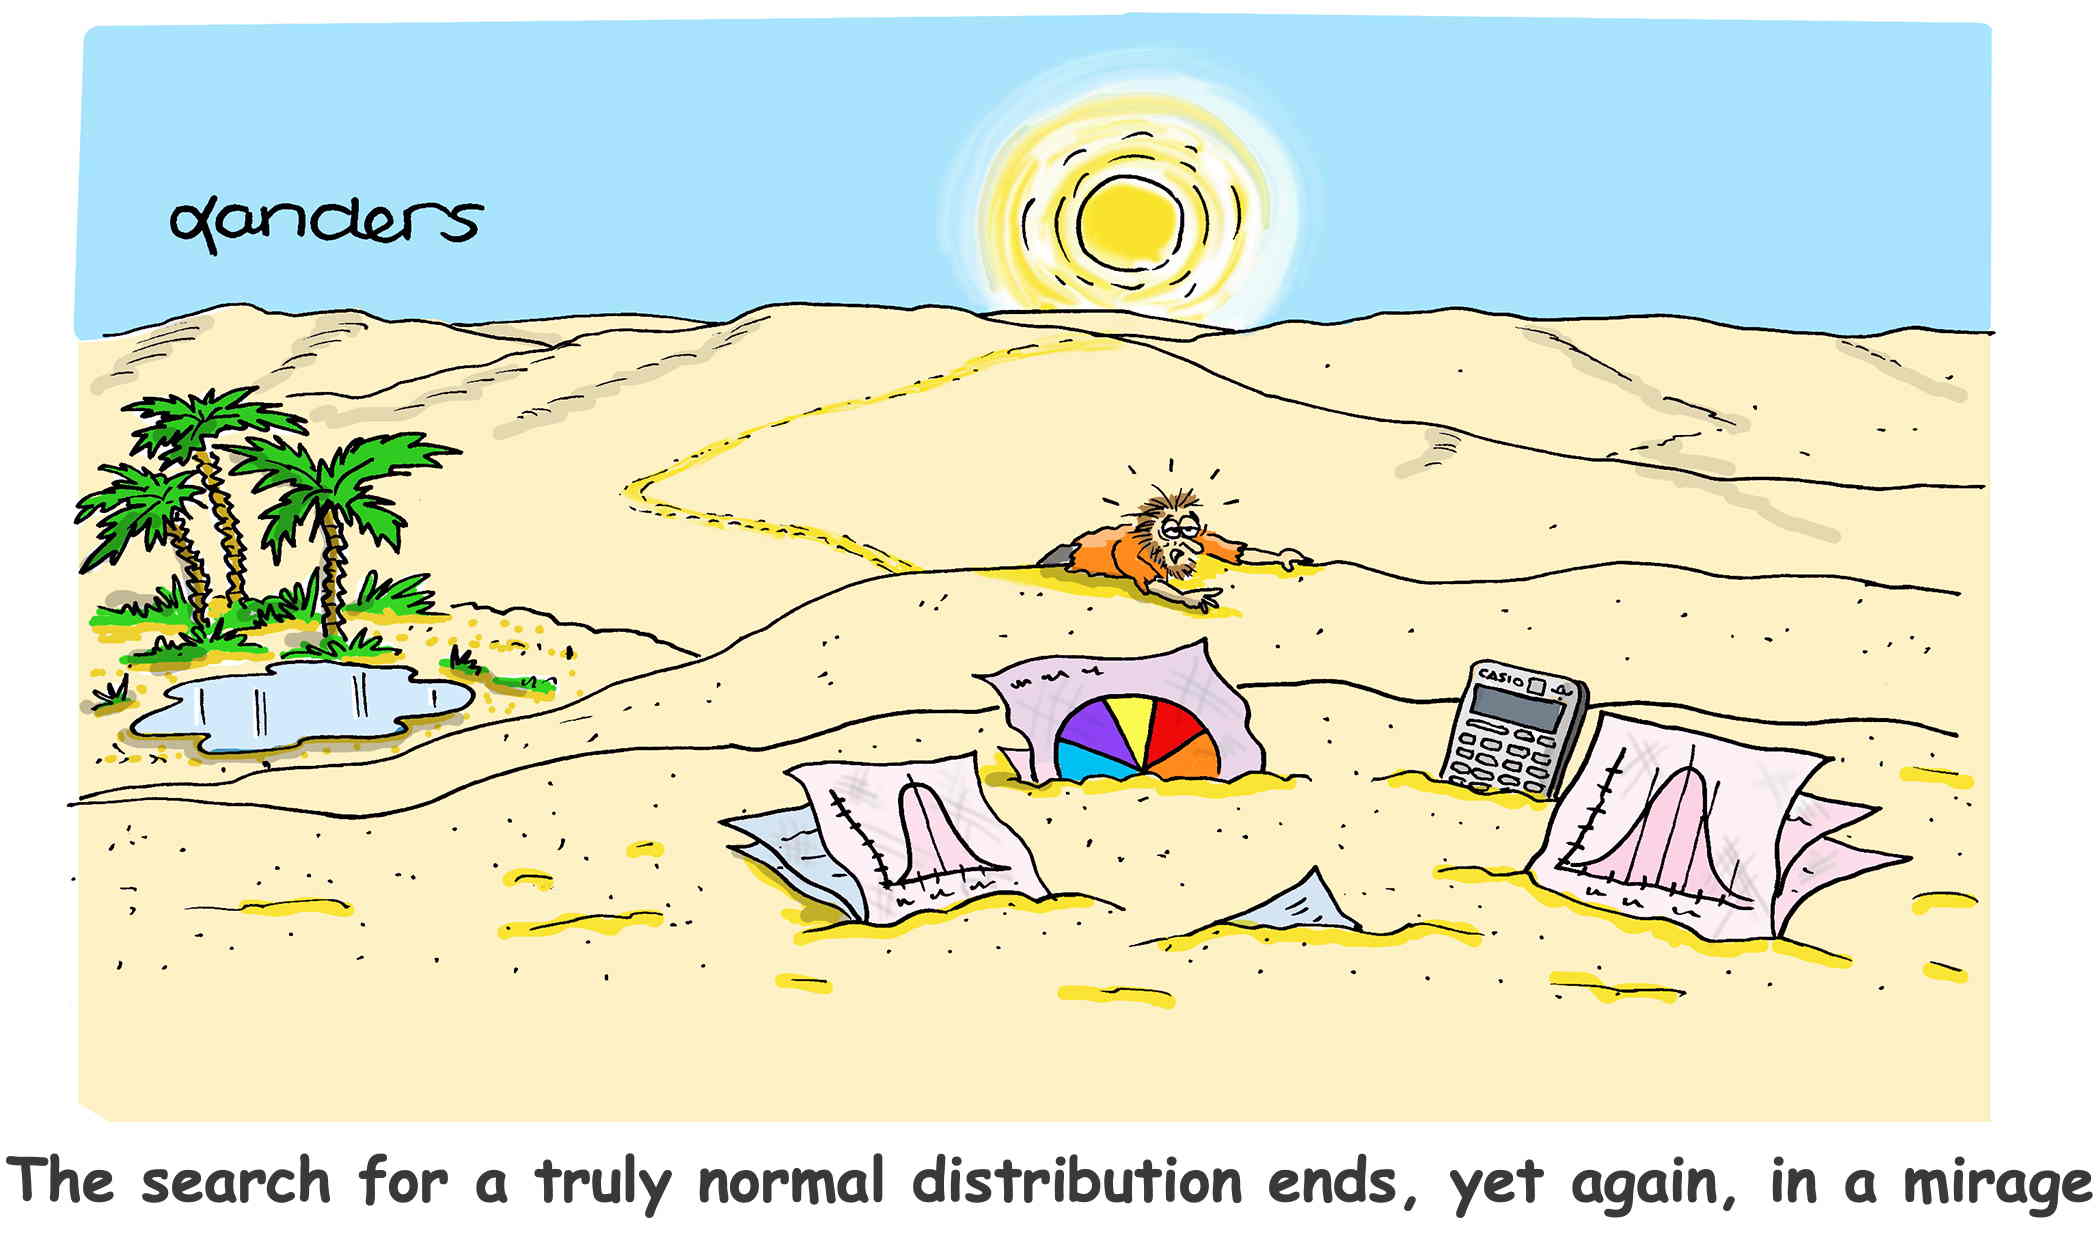 cartoon showing man crawling in desert and coming upon an Oasis filled with old style graphs (pie charts, normal curve pictures, and an old calculator. Caption says: The search for a truly normal distribution ends, yet again, in a mirage